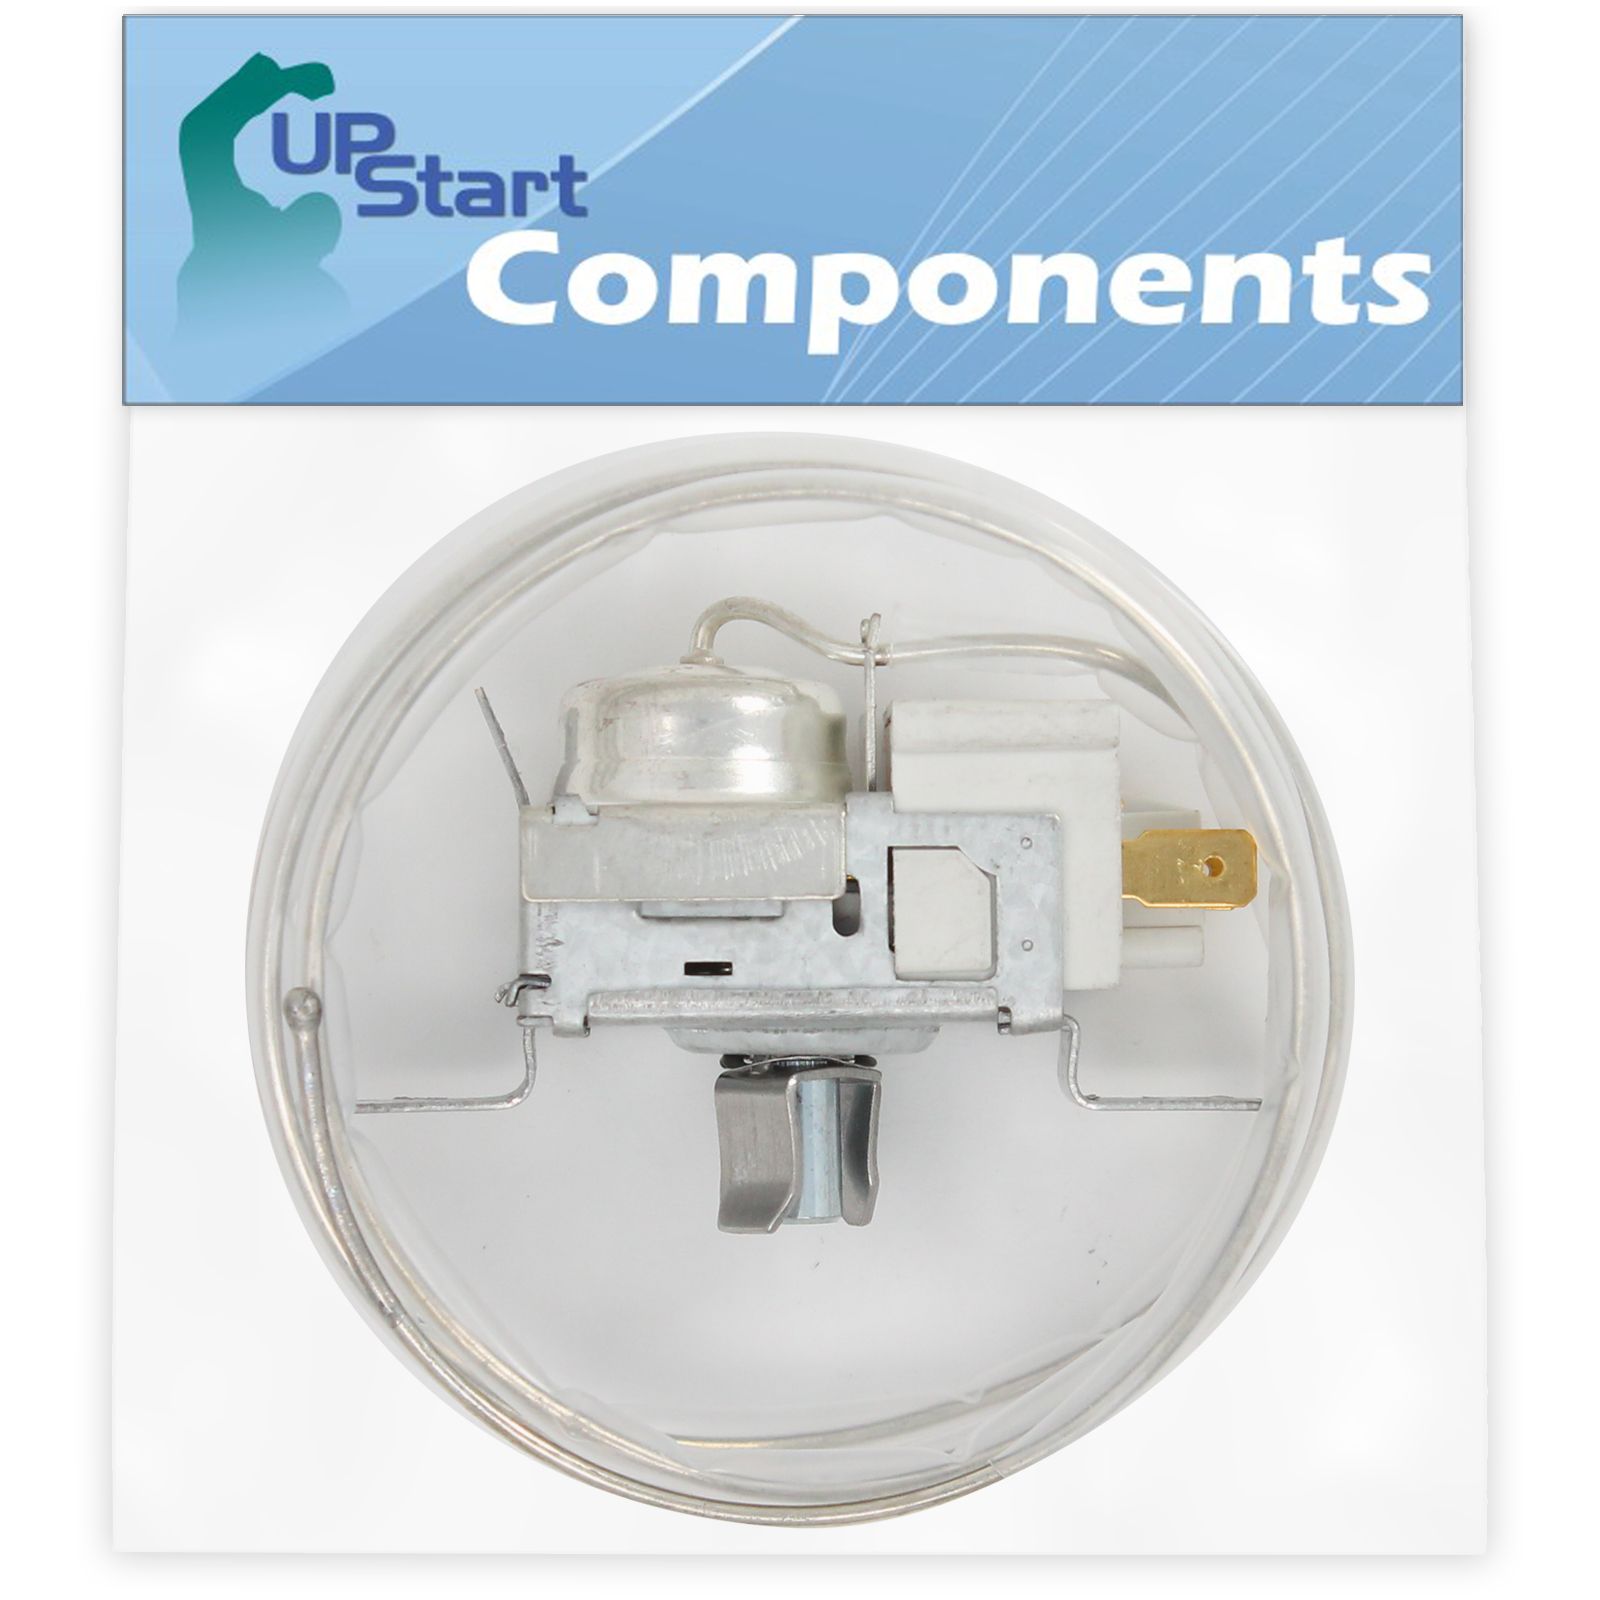 2198202 Cold Control Thermostat Replacement for Whirlpool 8ED20TKXDW00 Refrigerator - Compatible with WP2198202 Refrigerator Temperature Control Thermostat - UpStart Components Brand - image 1 of 3